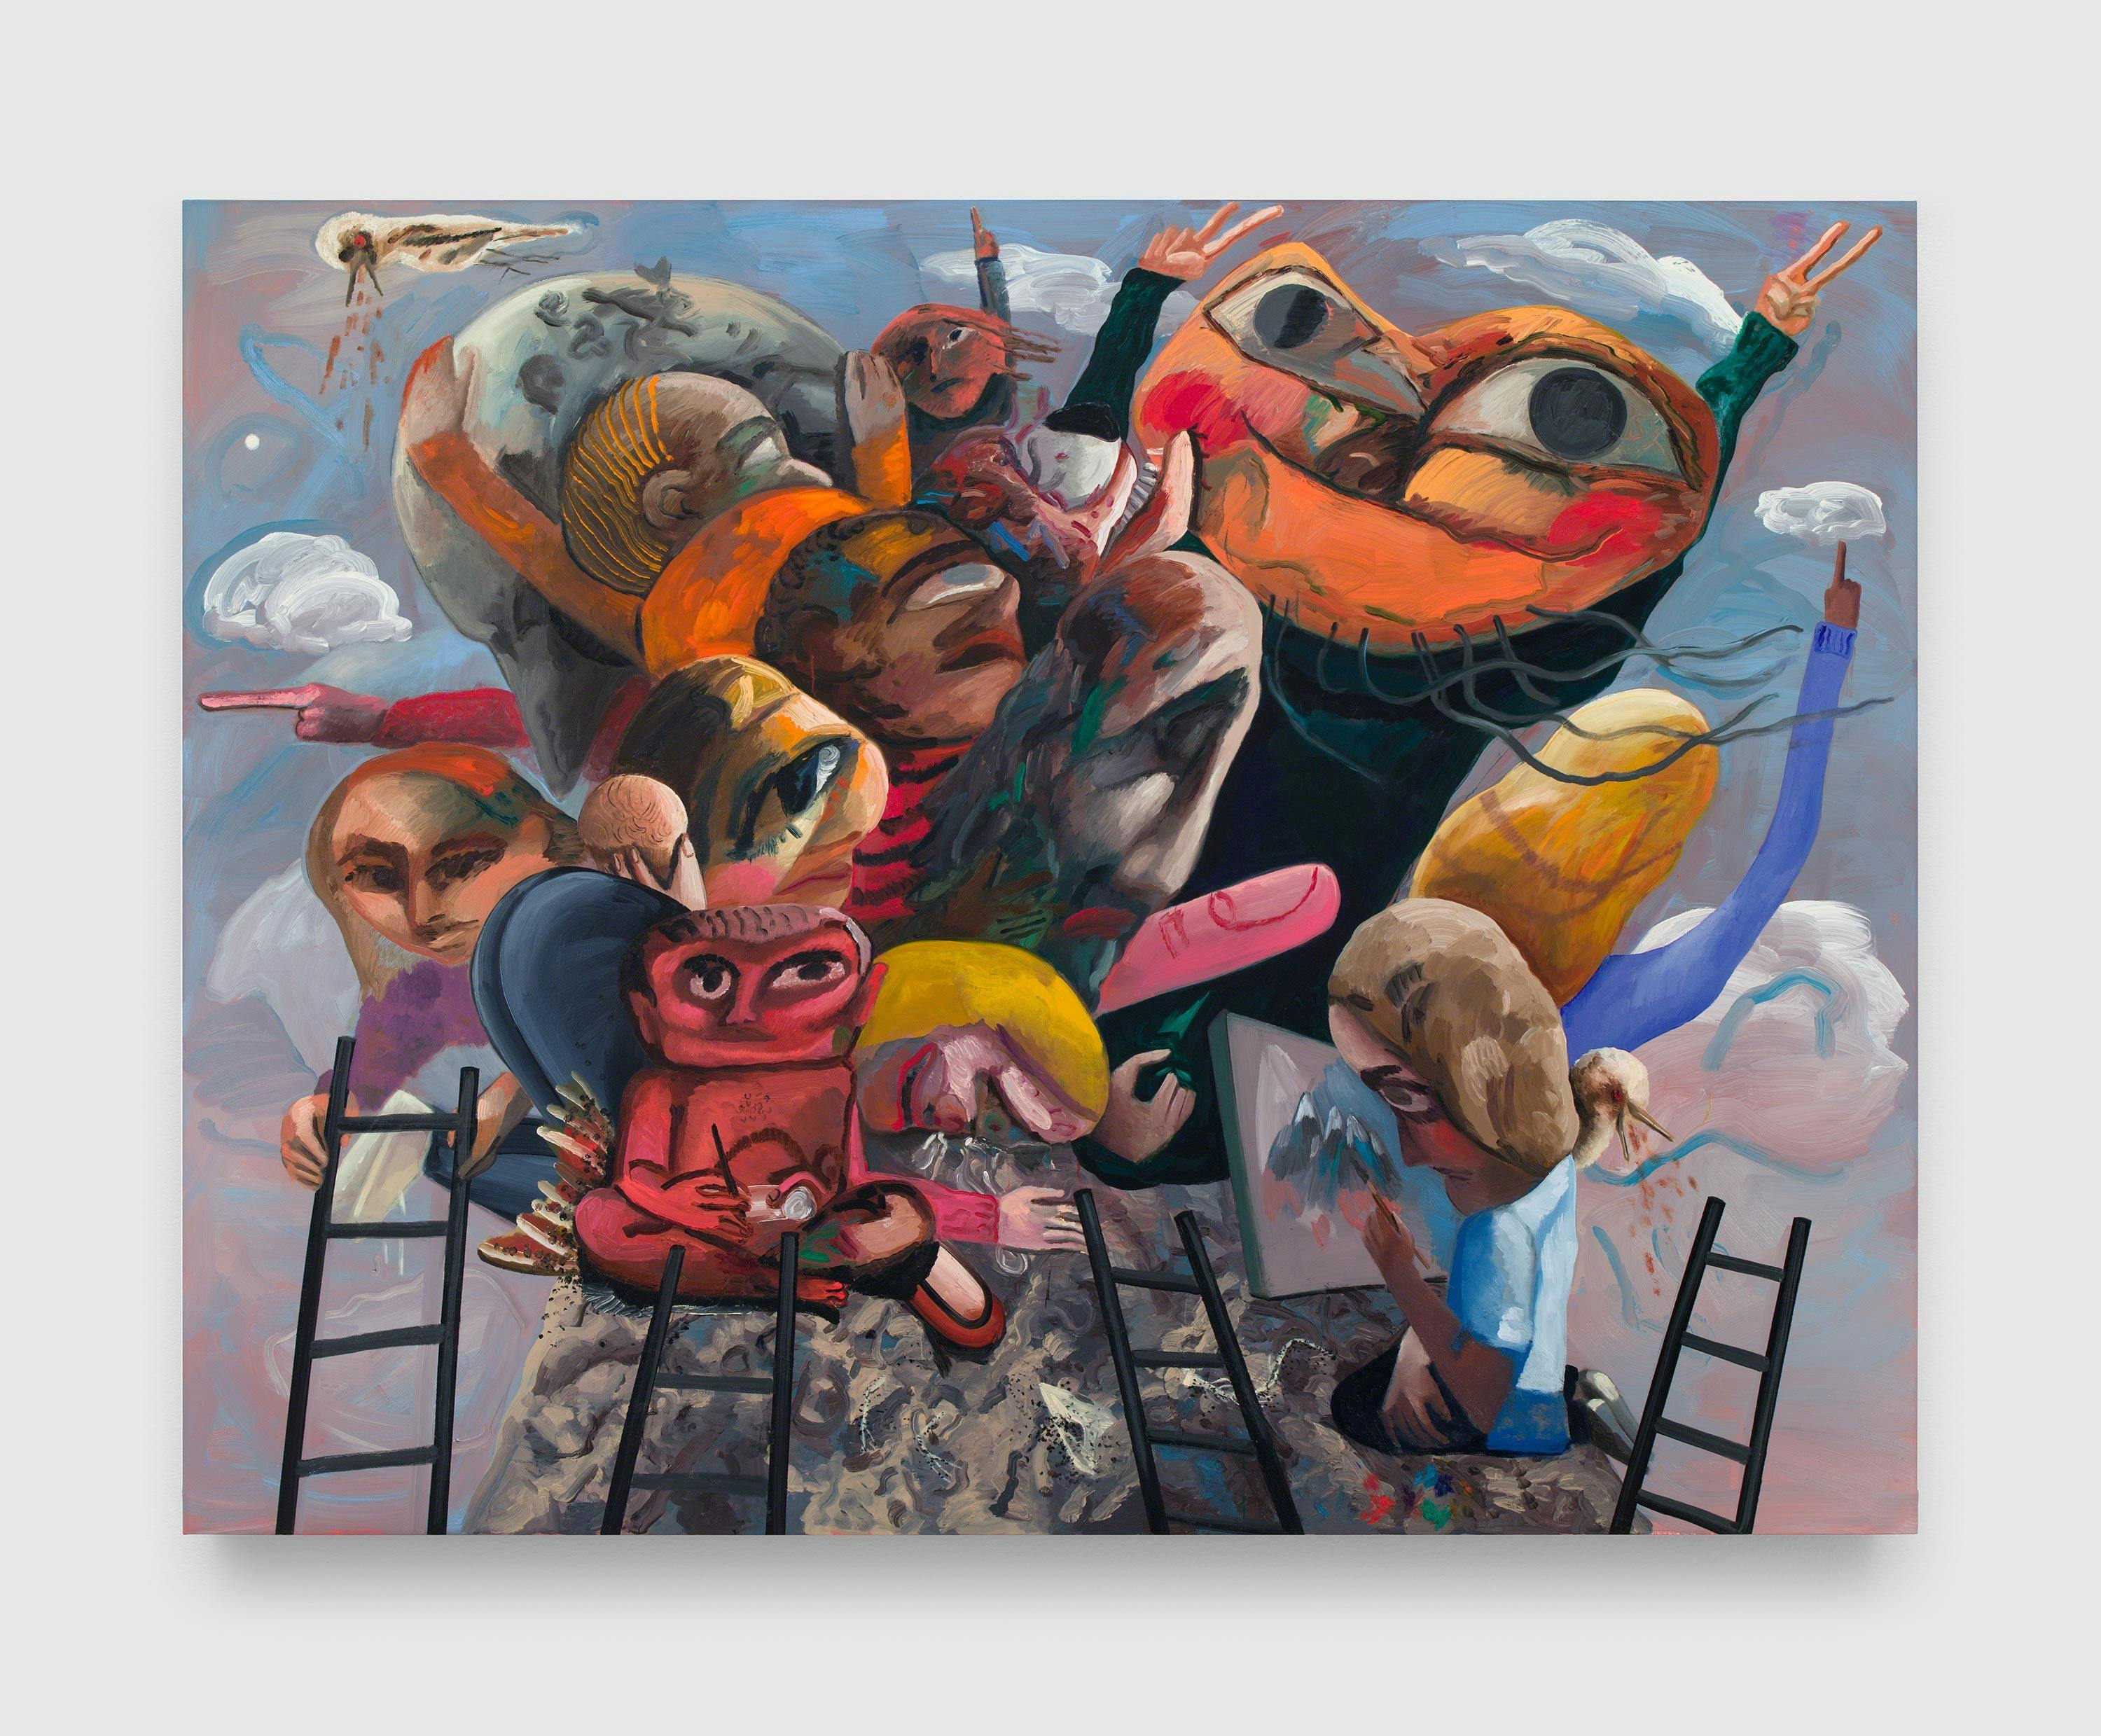 A painting by Dana Schutz, titled Mountain Group, dated 2018.